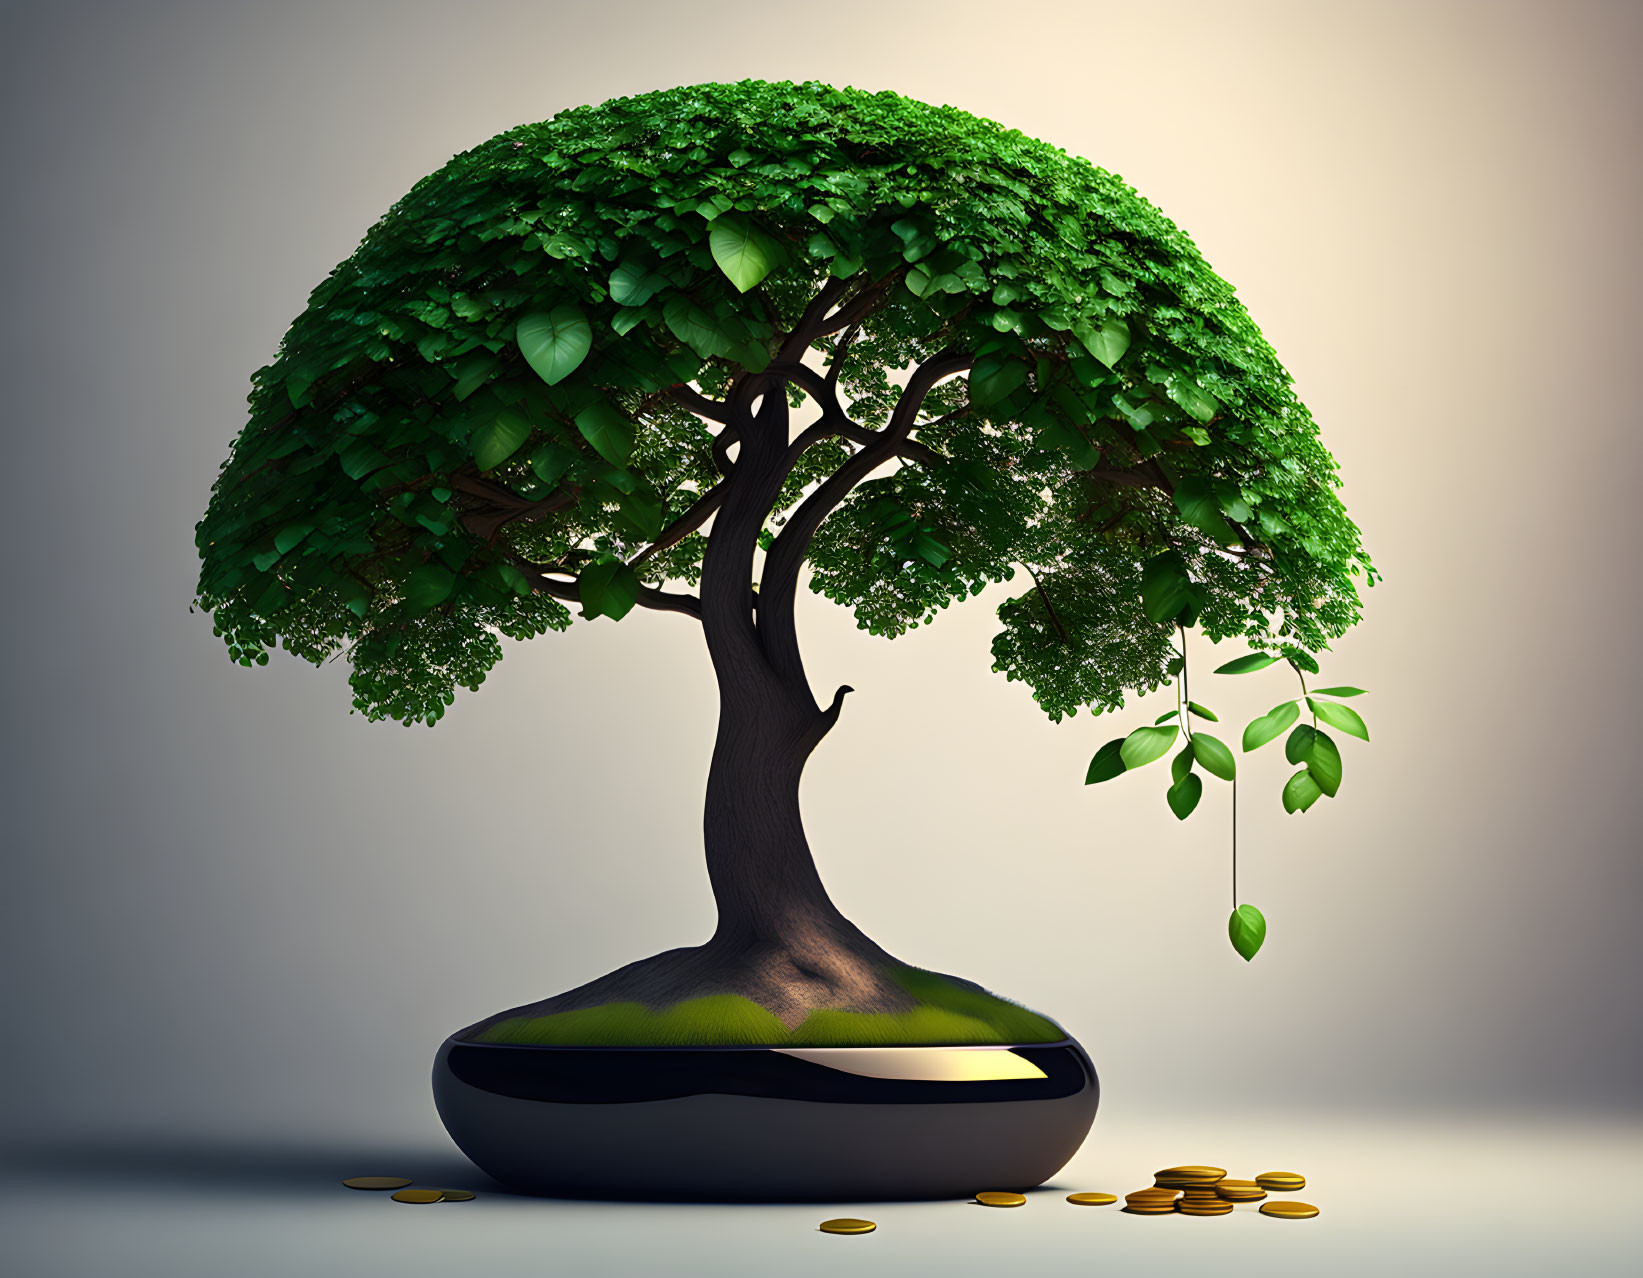 Green tree in black pot with scattered gold coins symbolizing financial growth